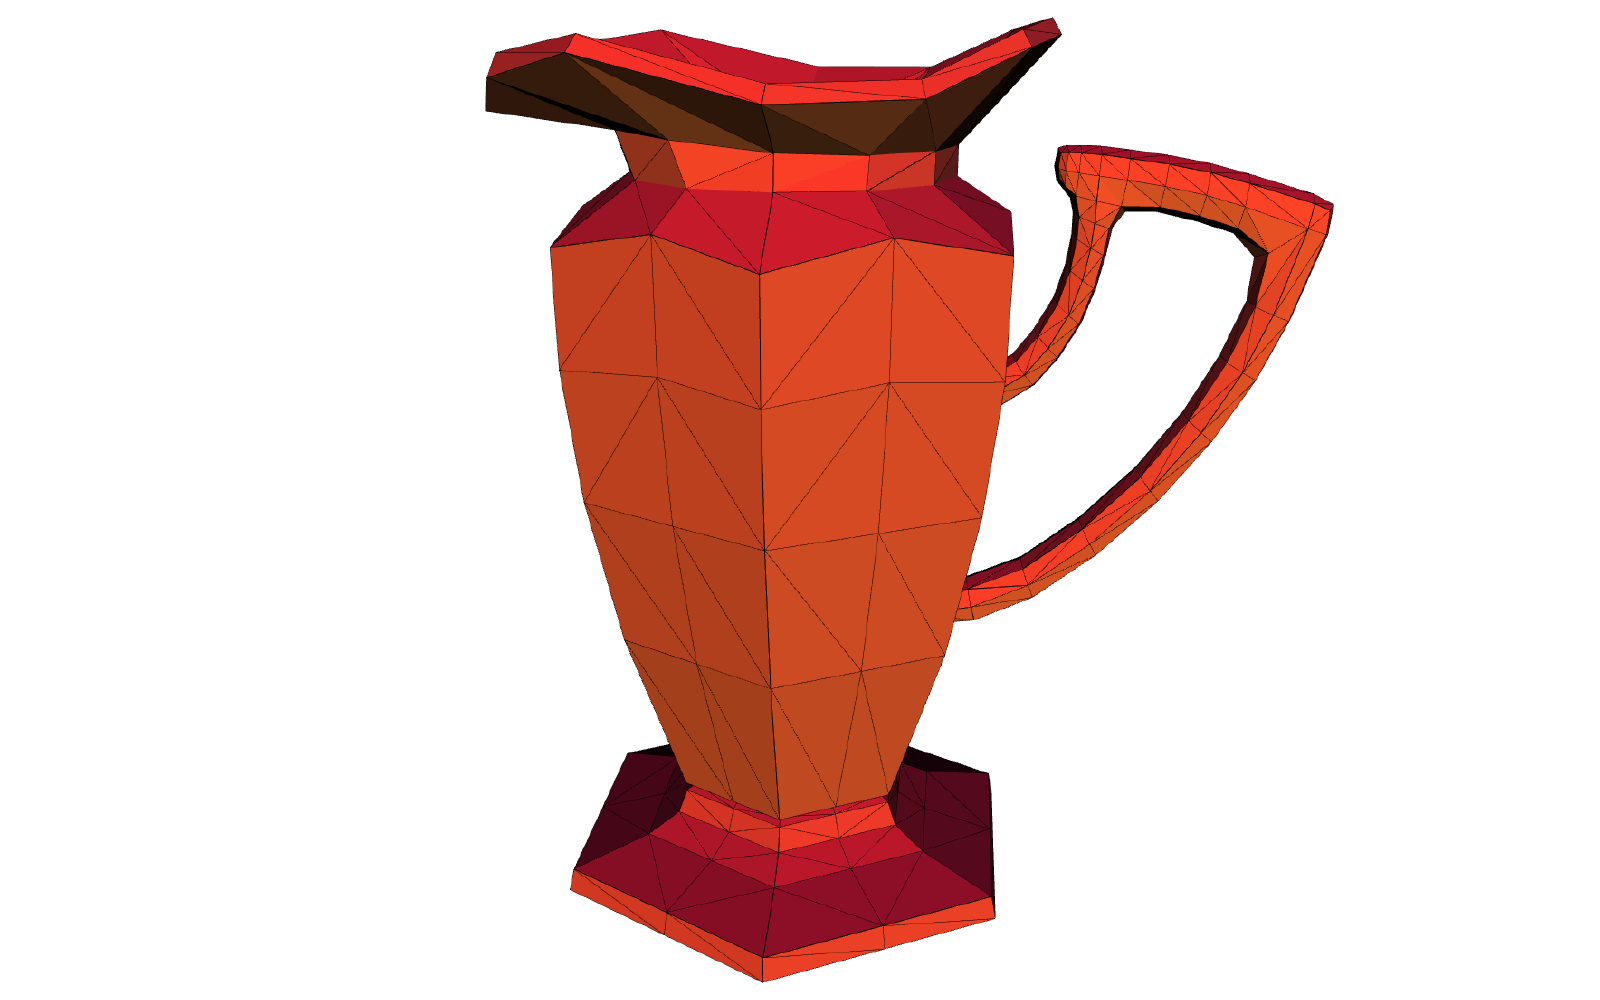 3D Model of a Milk Jug For Drawing Reference